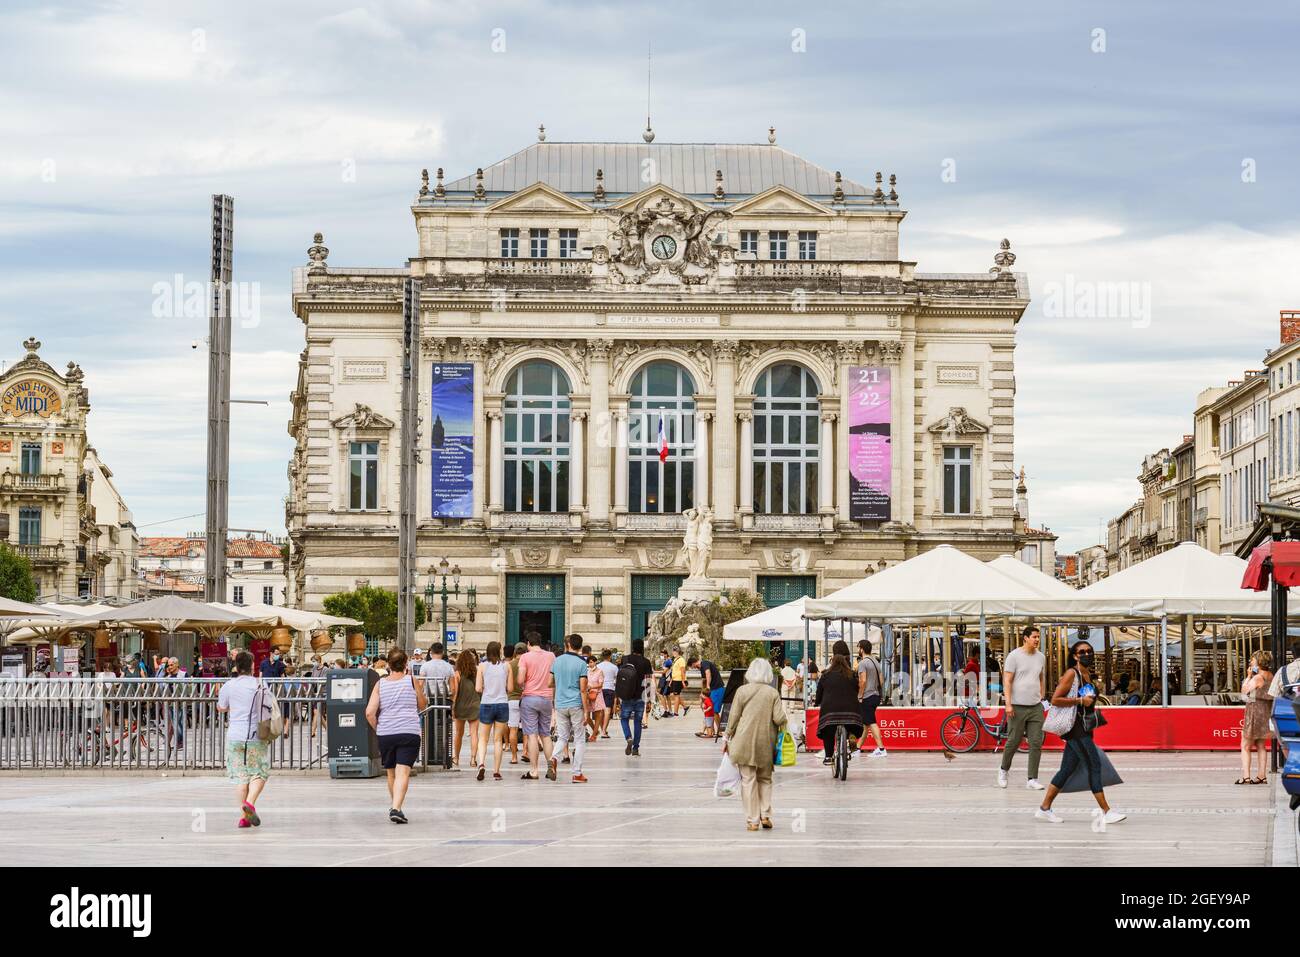 Montpellier, France, August 5, 2021. View of Opera in the Place de la Comedie. Stock Photo